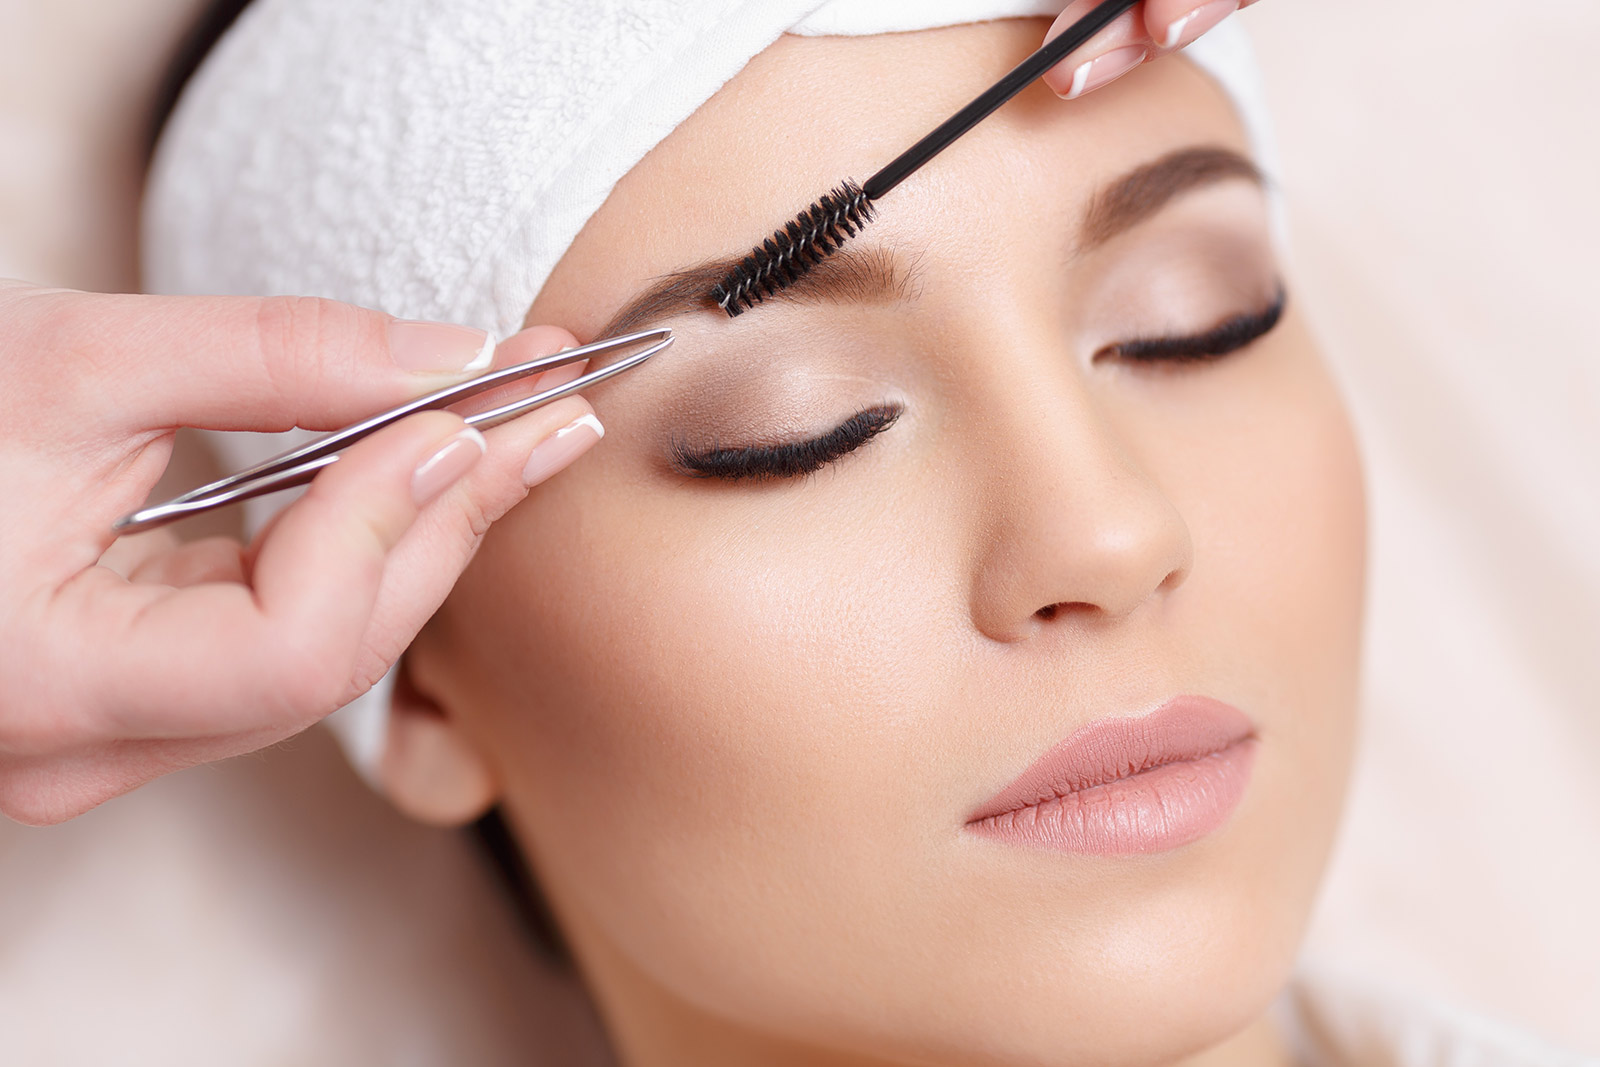 How to make your eyebrows perfect Painless eyebrow shaping